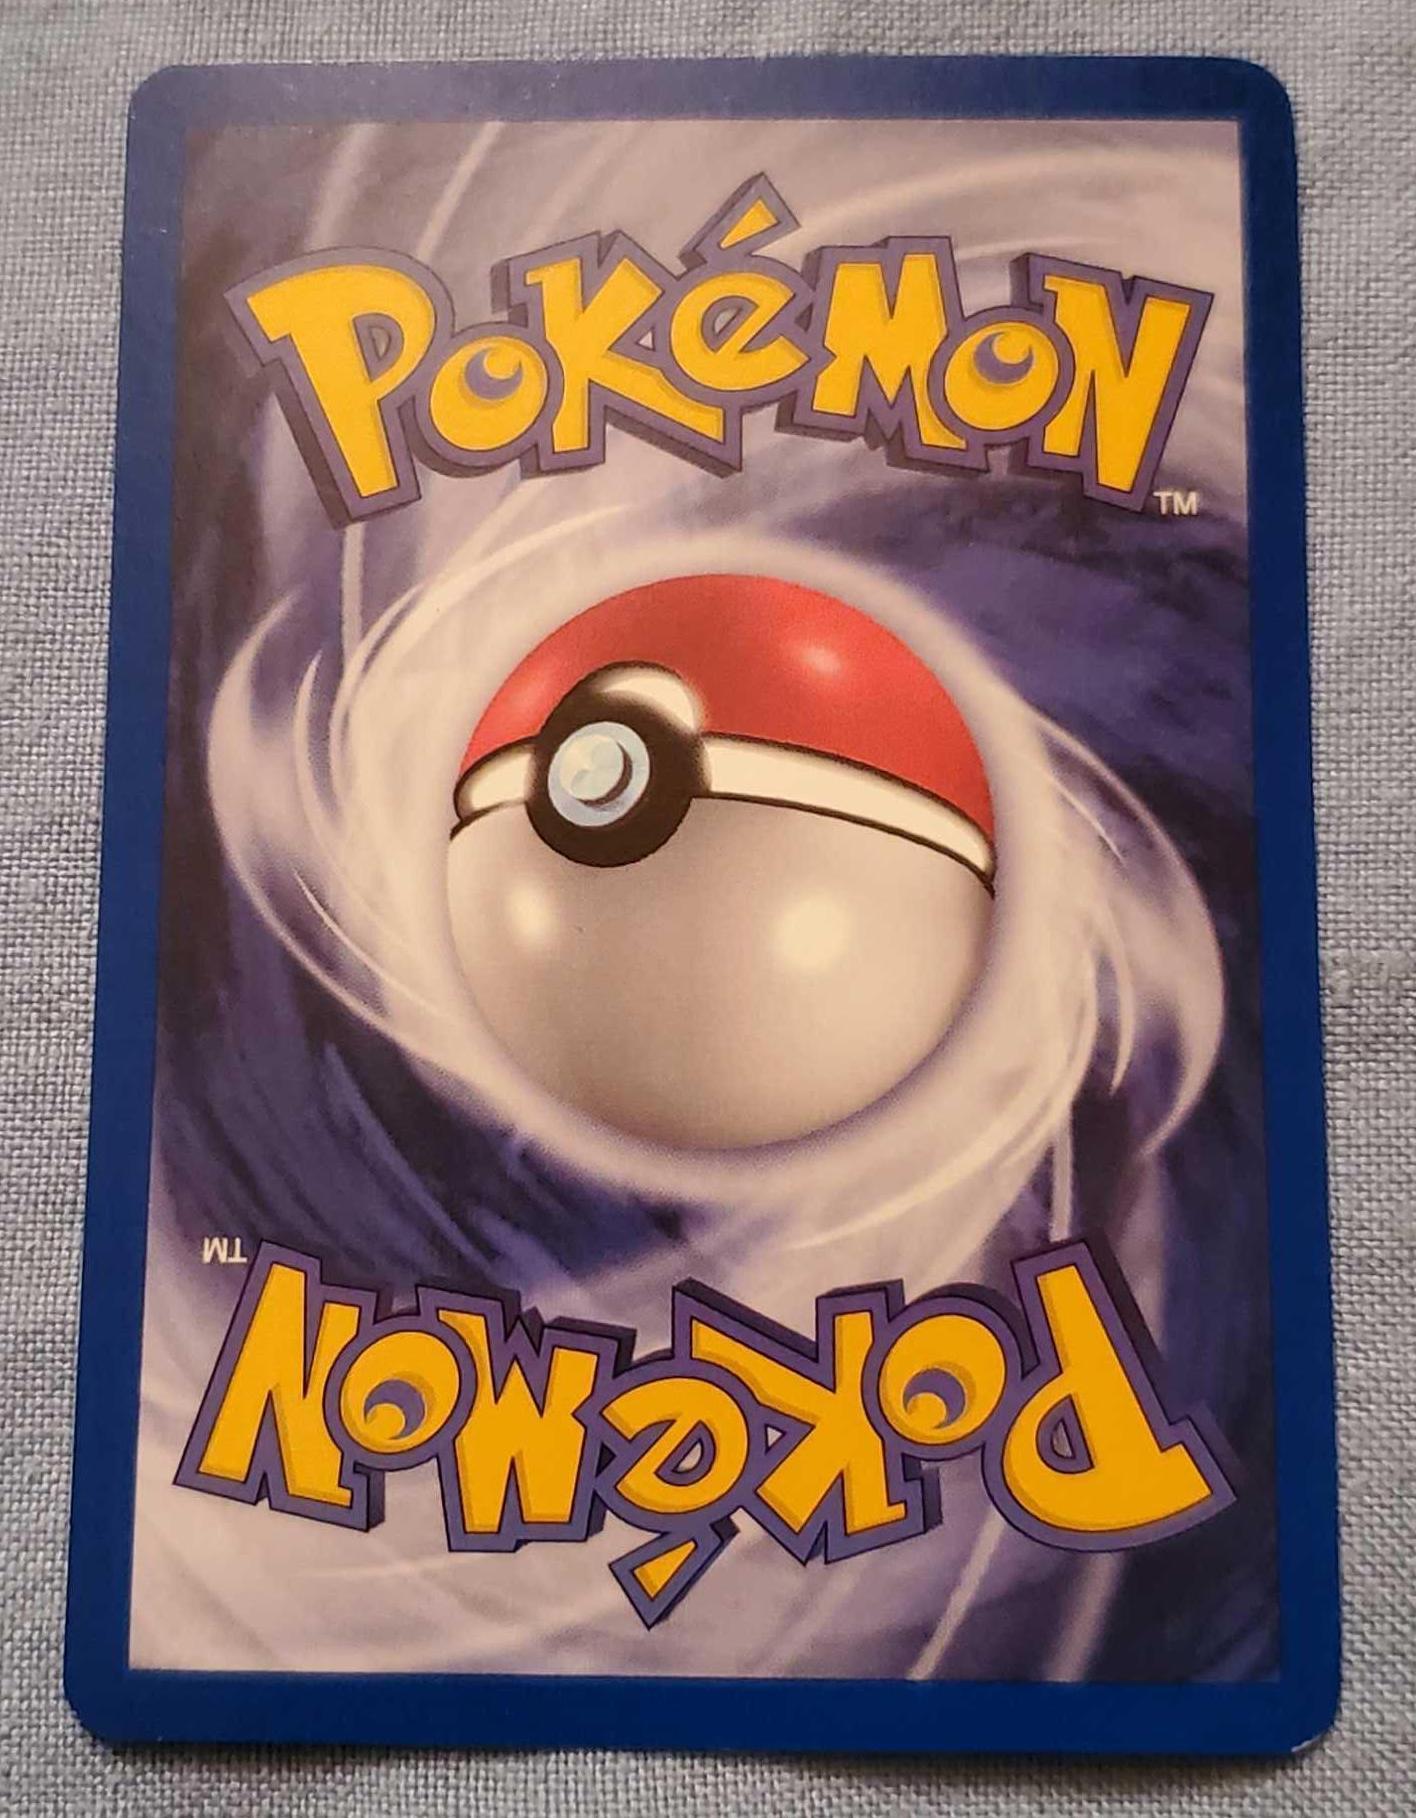 Album of 1999-2007 Pokemon Cards In Pokemon Album with The Electric Tale of Pikachu 4 Vol. Comic